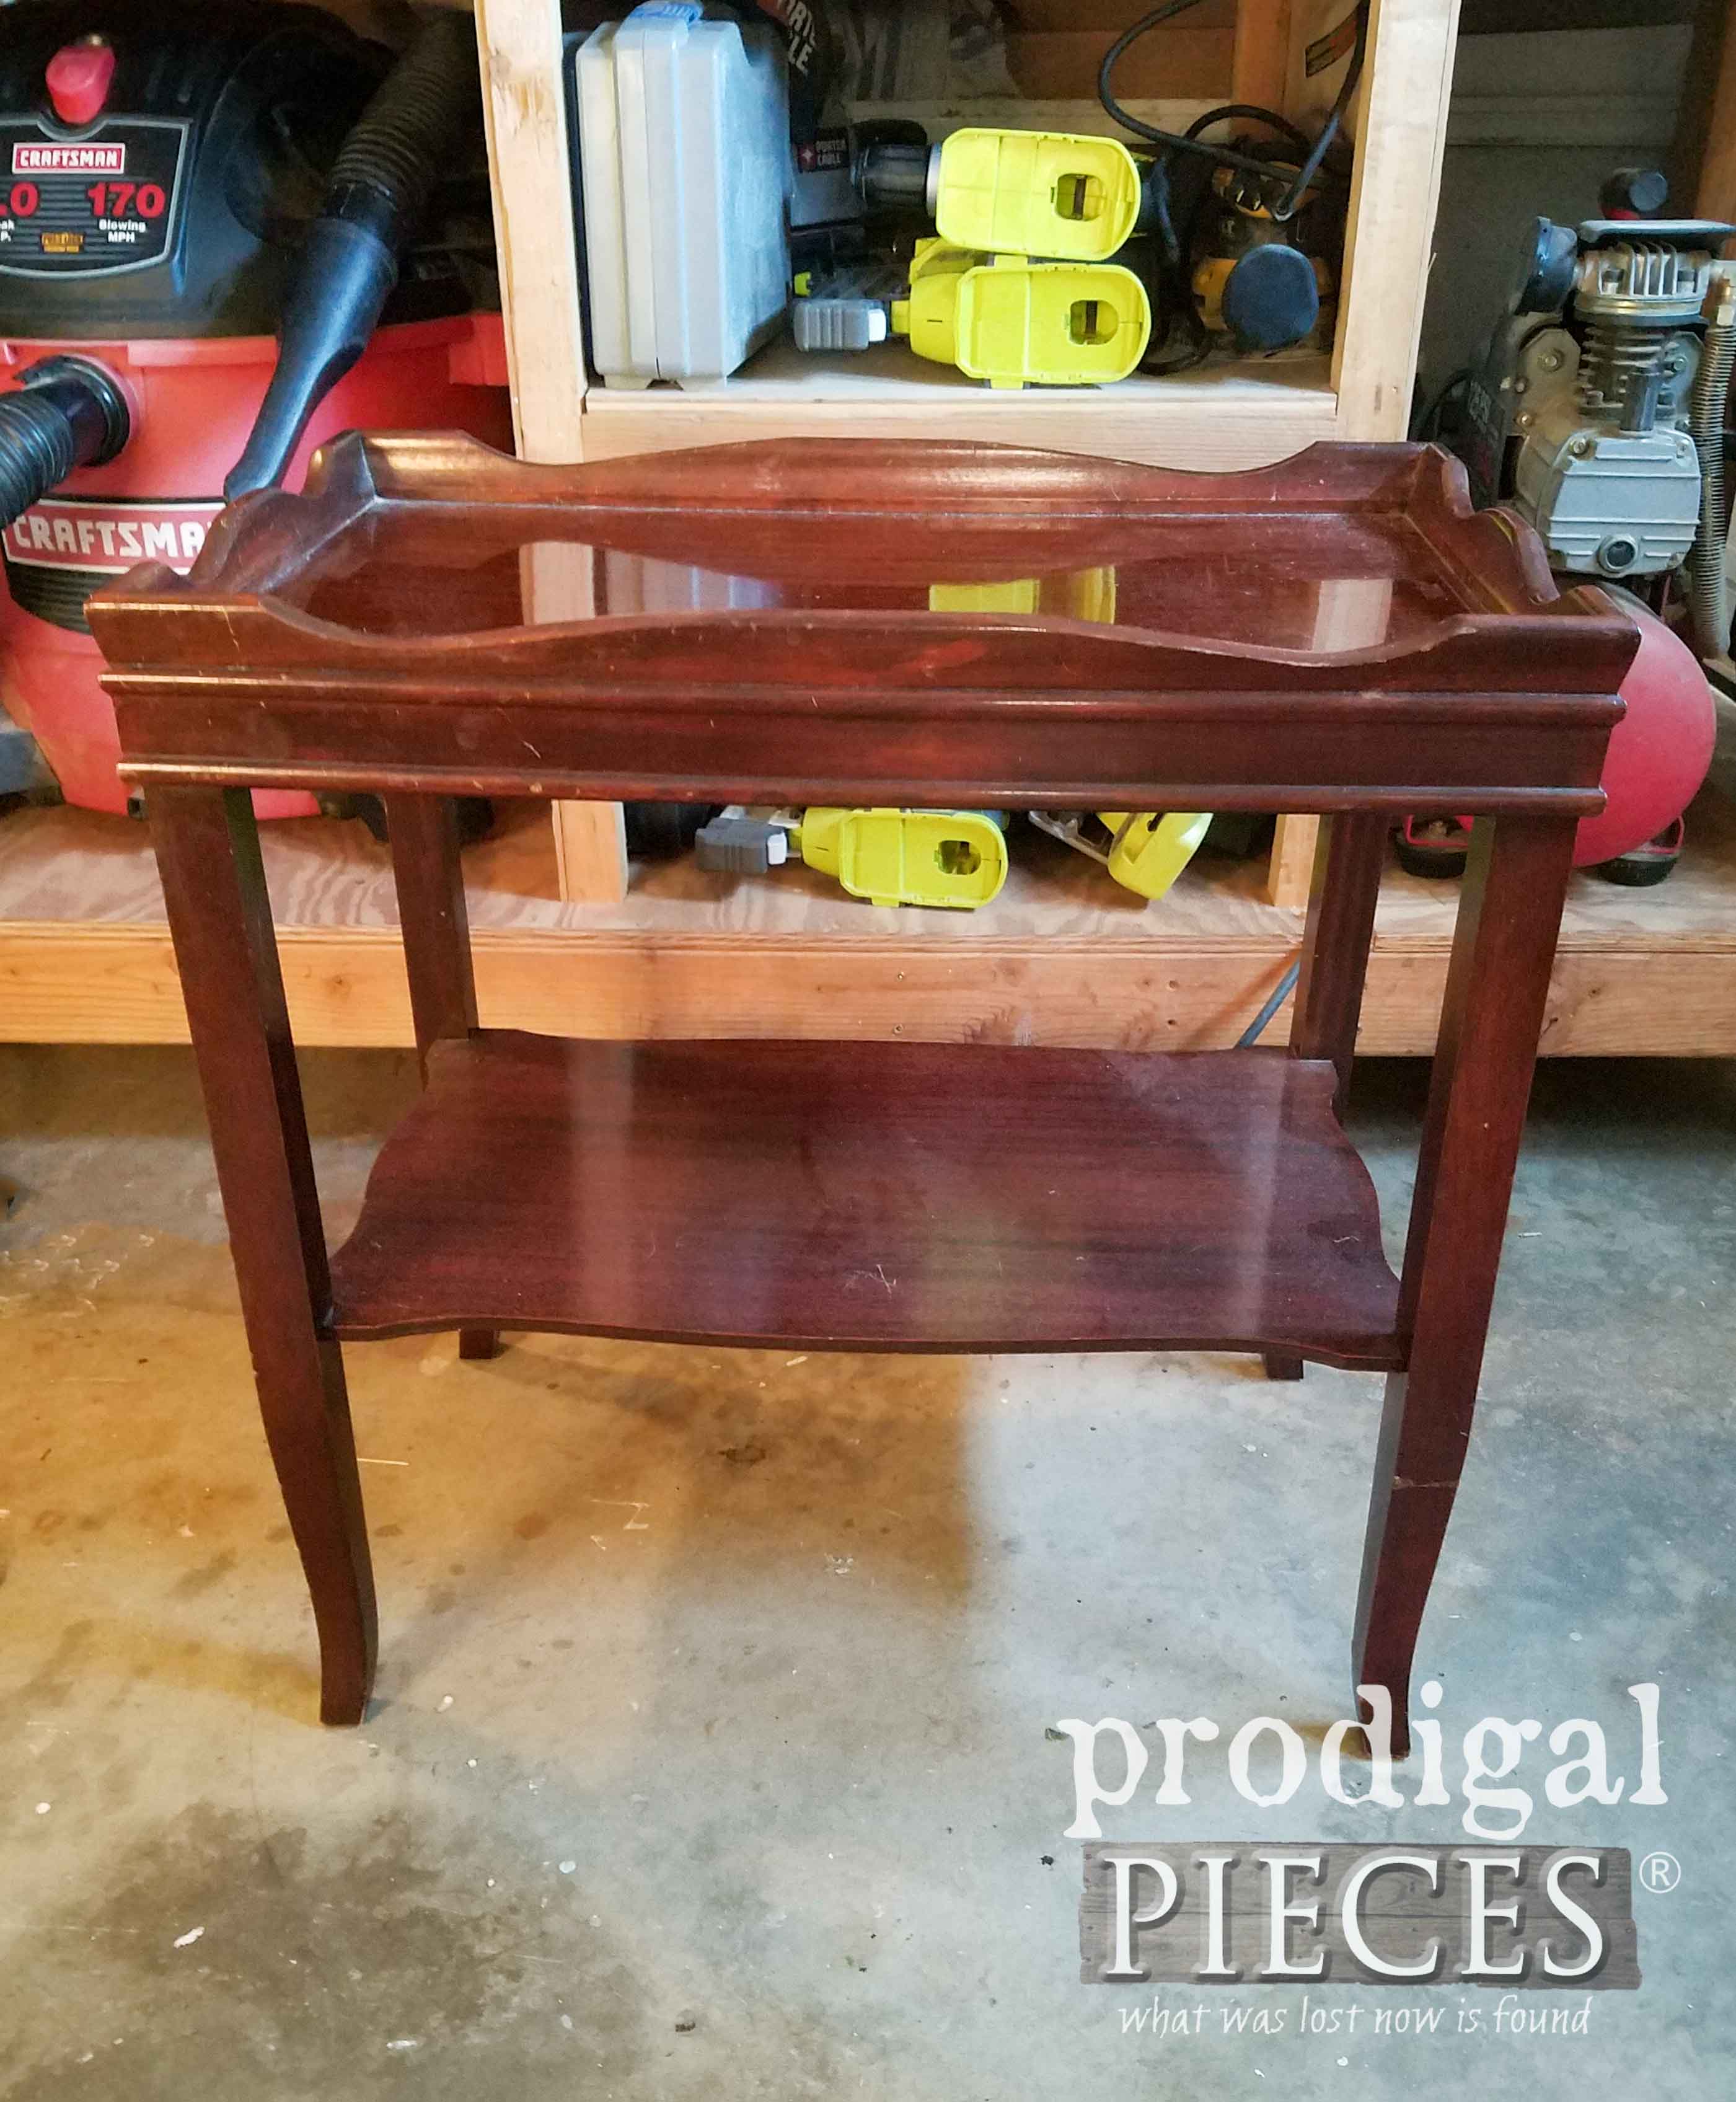 Vintage Side Table Before | prodigalpieces.com